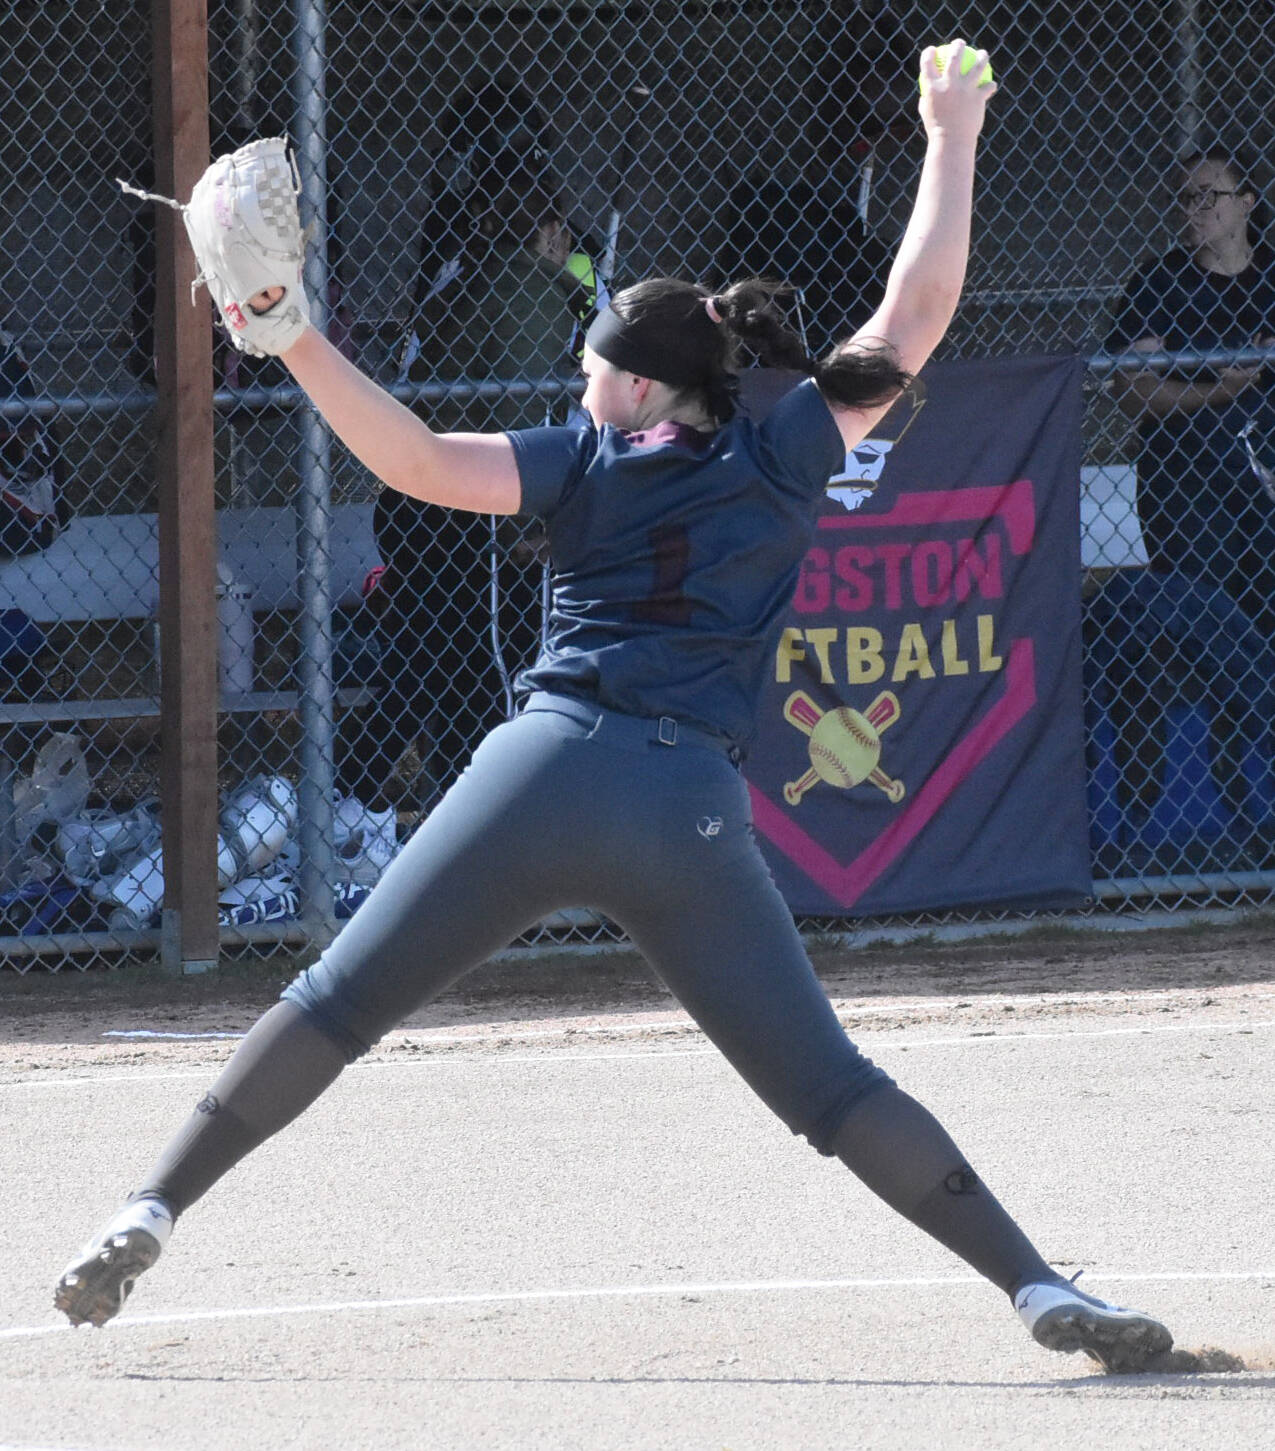 Kingston’s Audrey Rienstra pitches against NK.